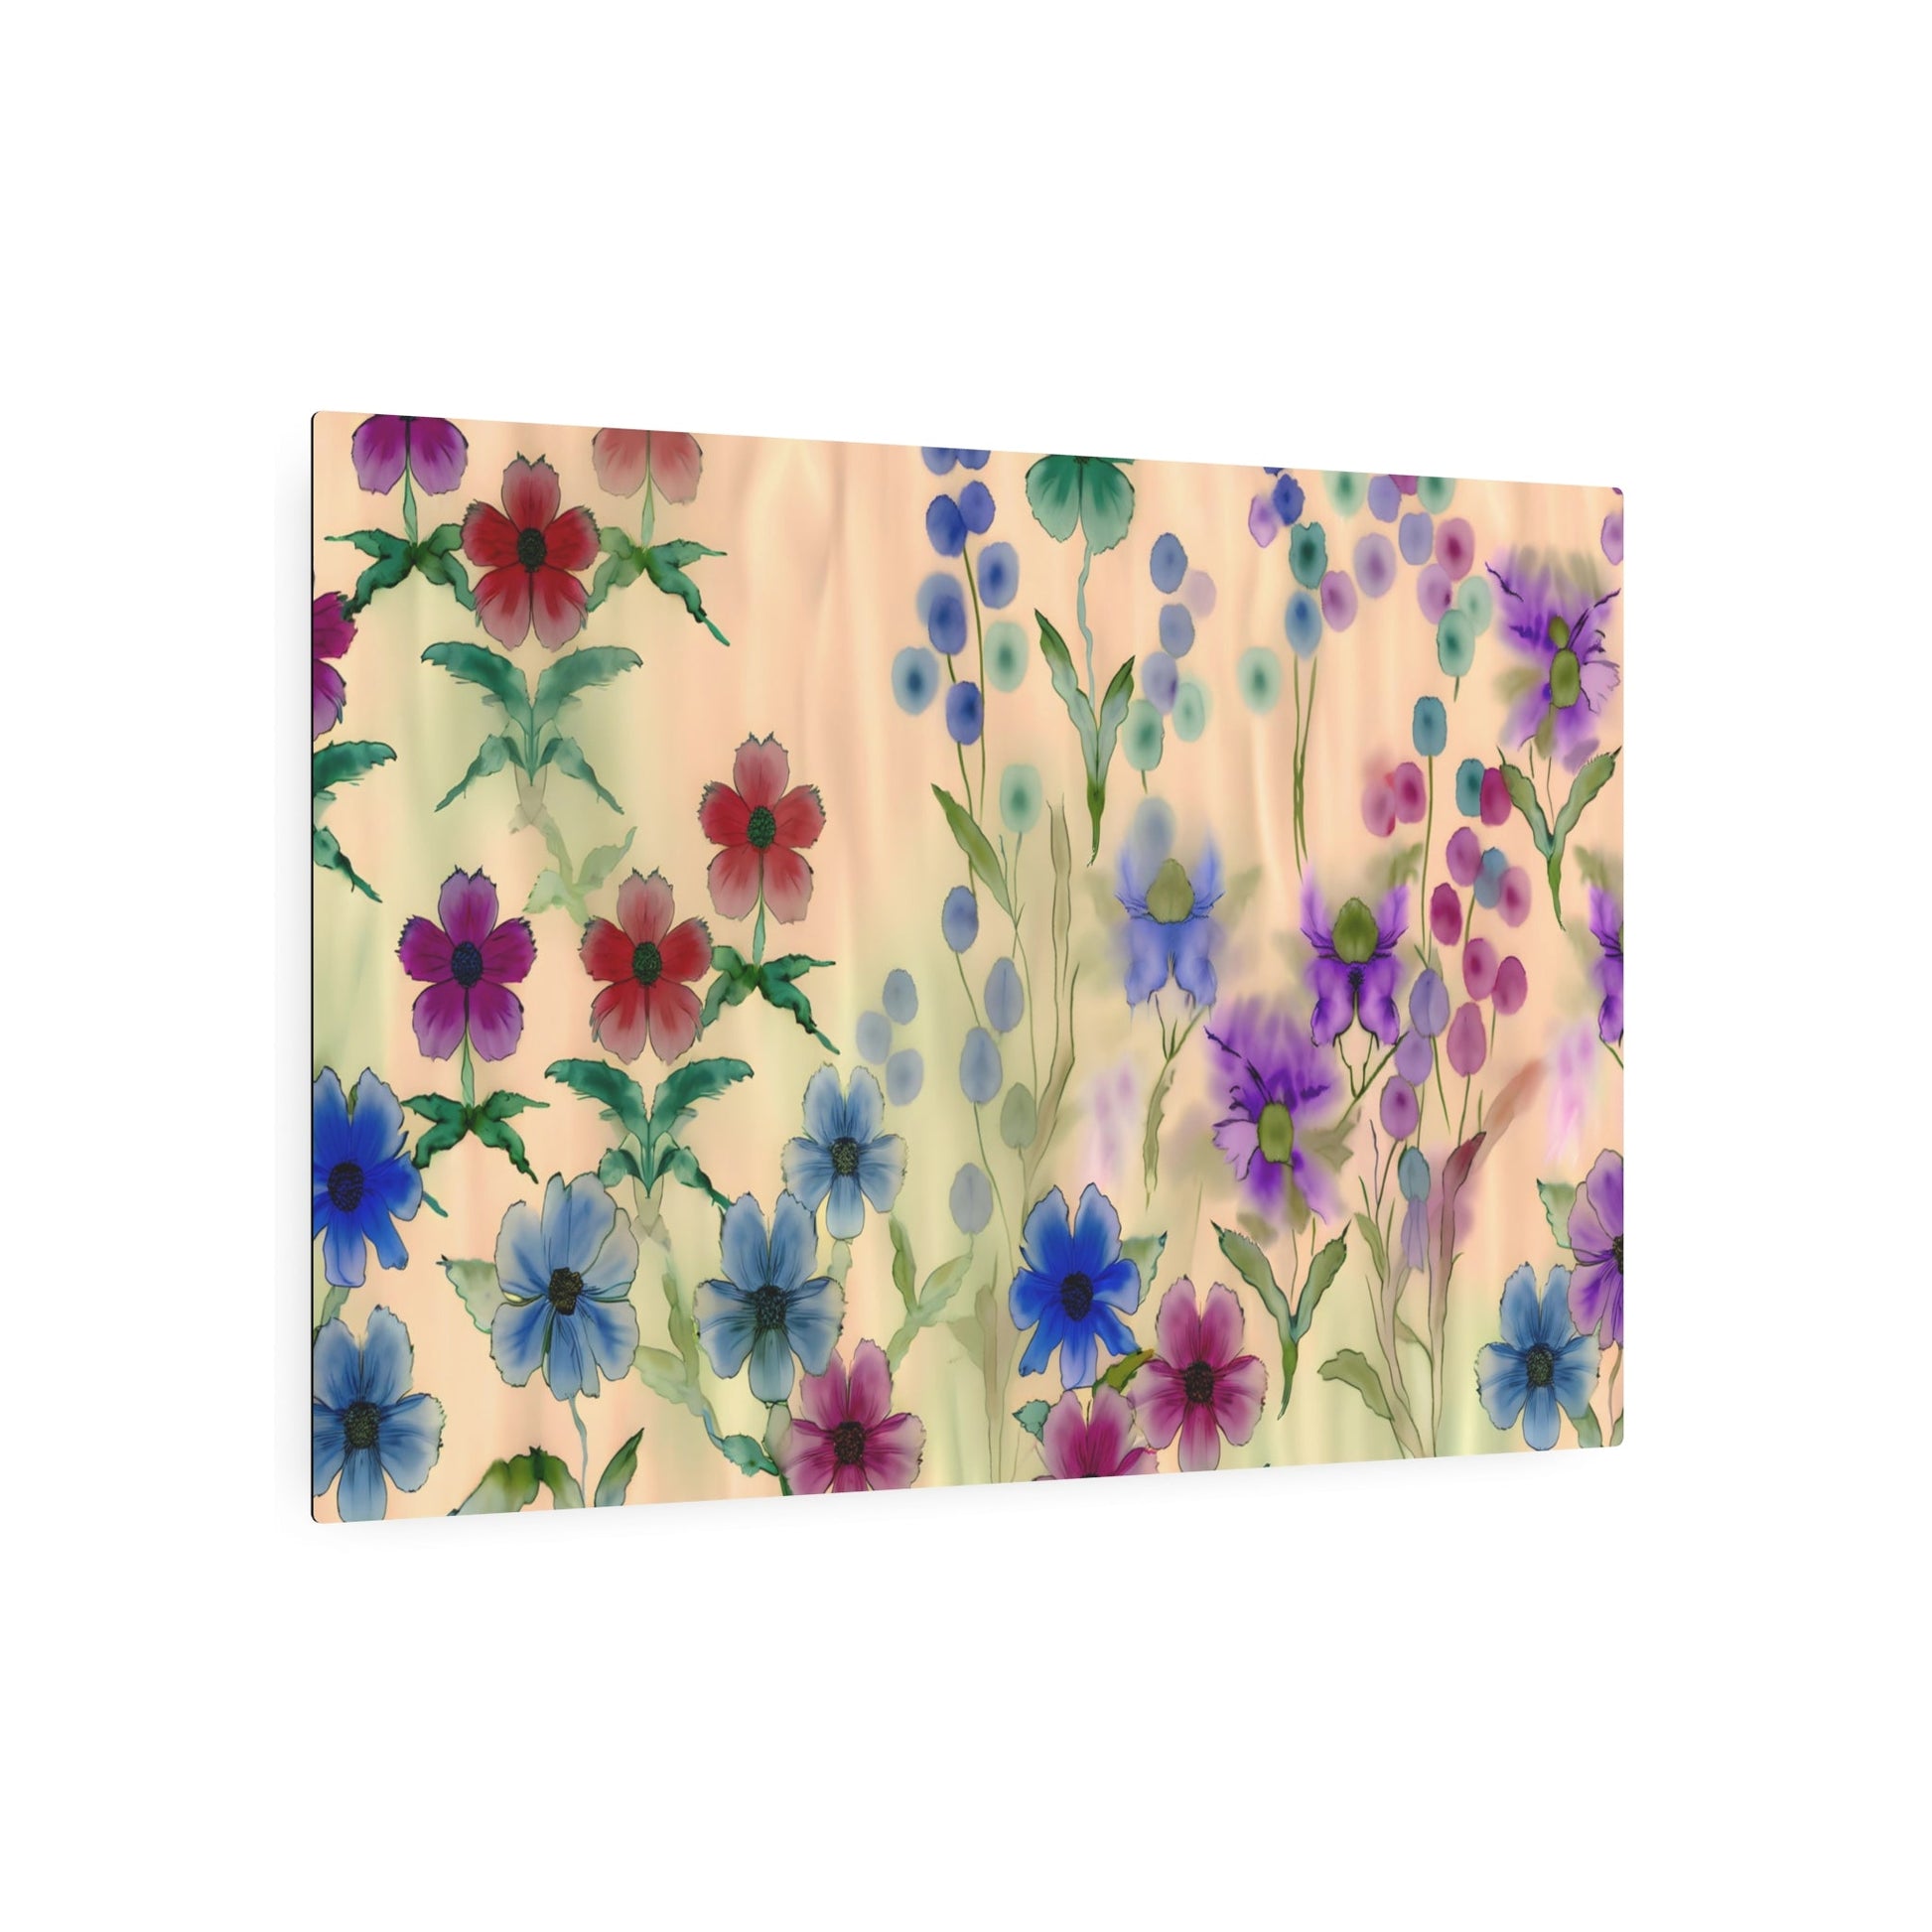 Metal Poster Art | "Tranquil Harmony: Chinese Silk Painting of Colorful Wildflowers in Traditional Far East Style - Asian Art Styles Collection" - Metal Poster Art 36″ x 24″ (Horizontal) 0.12''